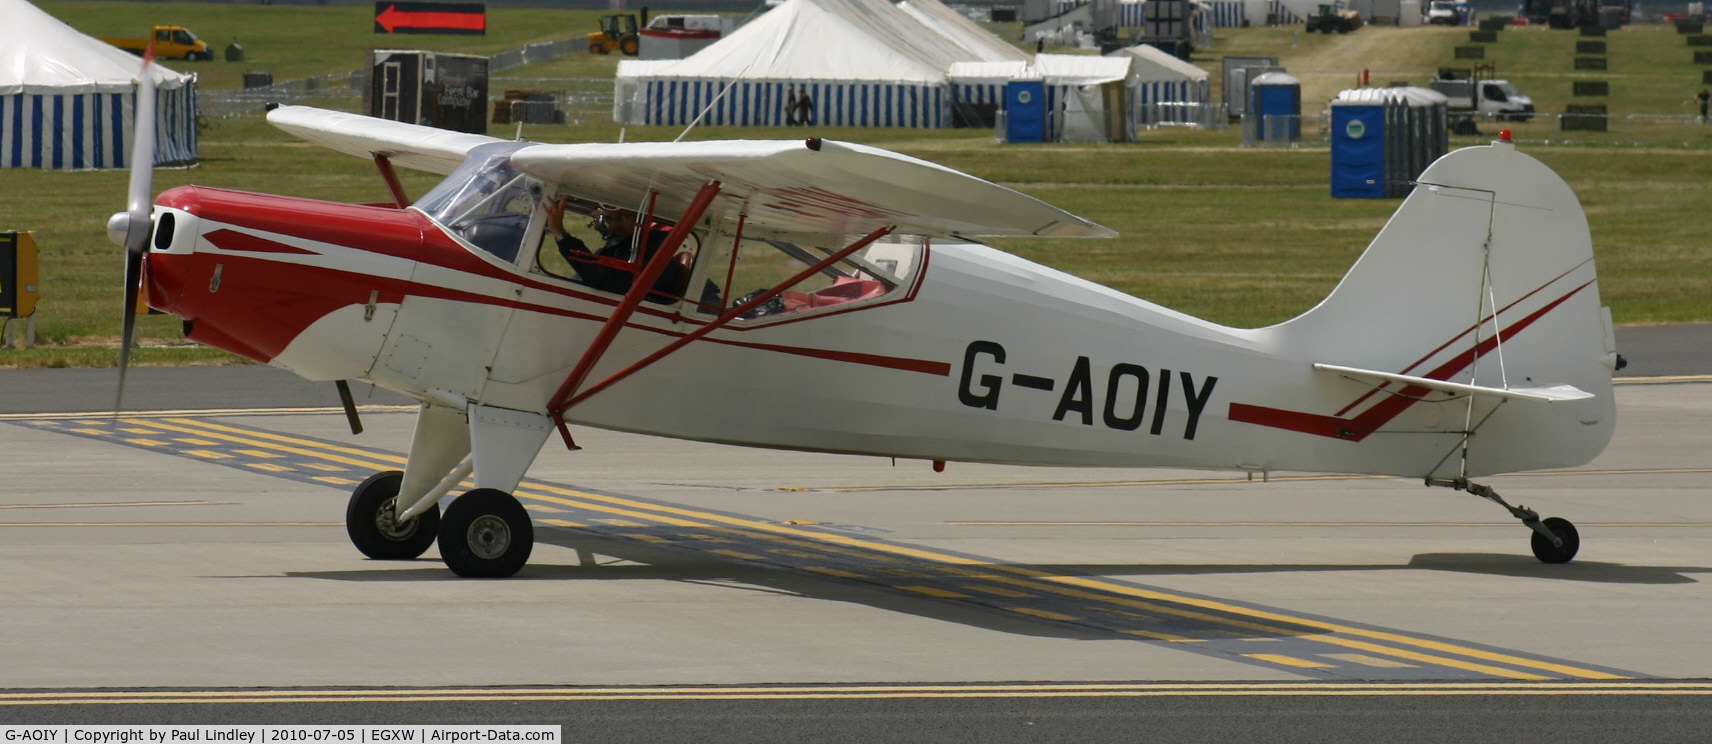 G-AOIY, 1956 Auster J-5G Cirrus Autocar C/N 3199, departing after the airshow